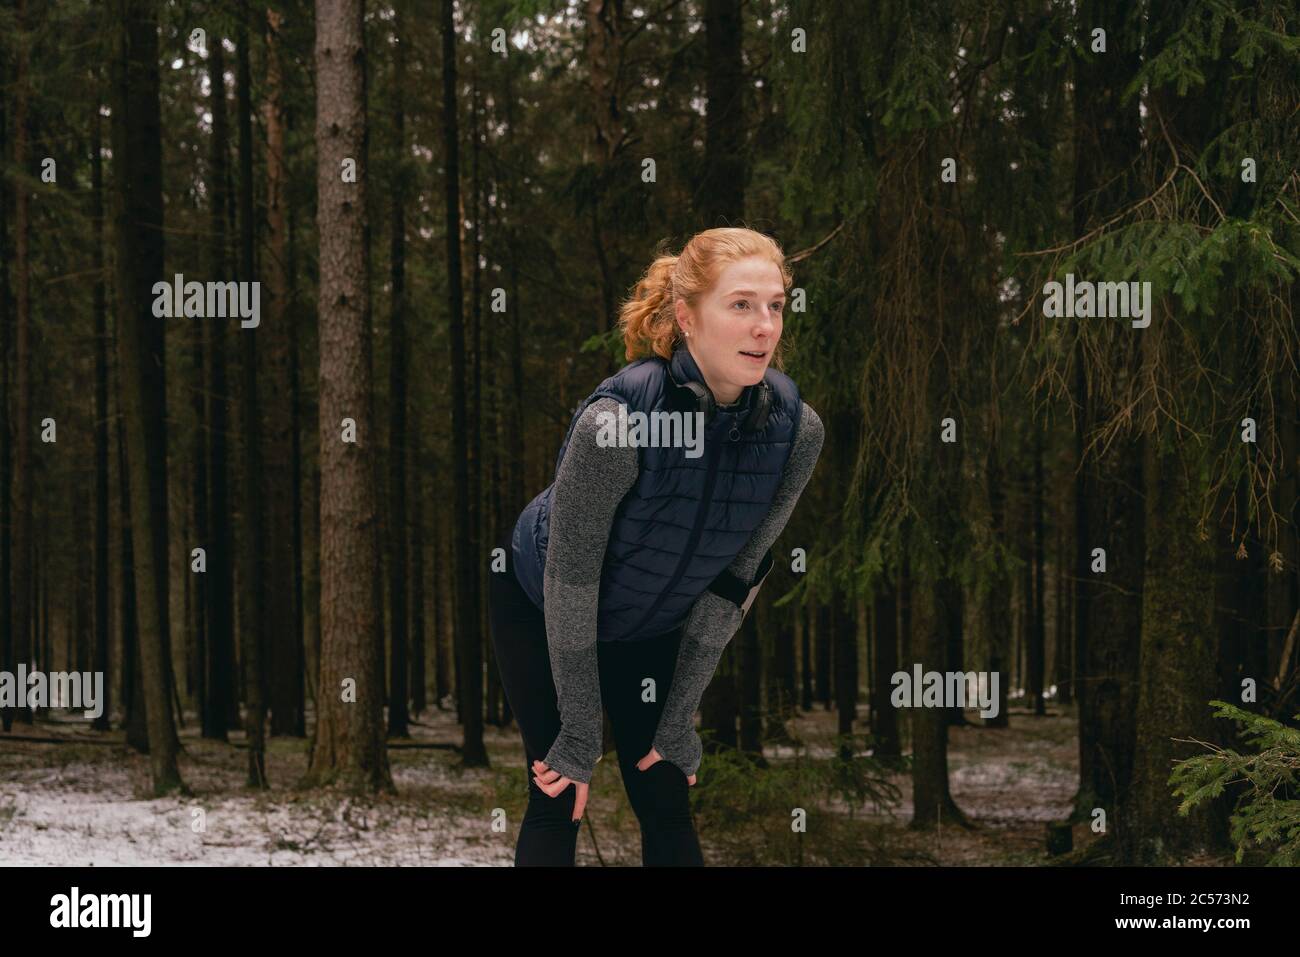 Female runner resting with hands on knees in snowy woods Stock Photo